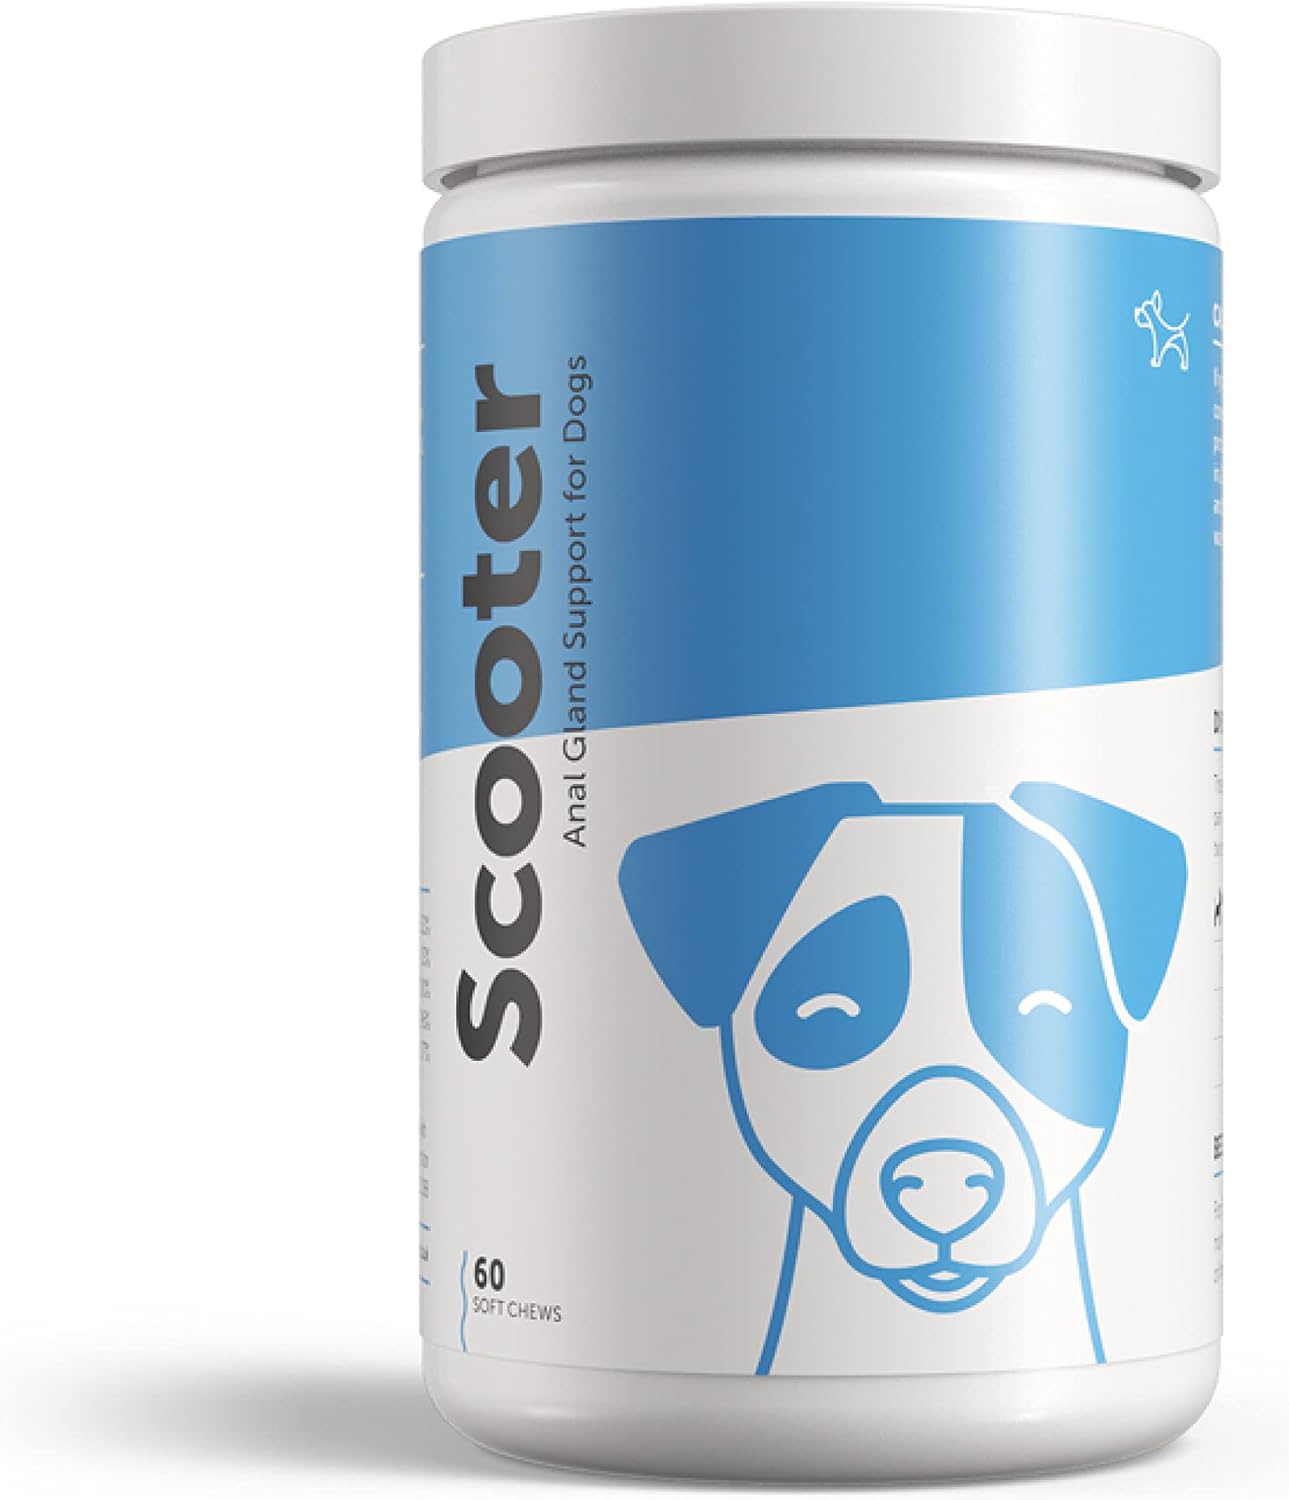 Dog's Lounge - SCOOTER - Digestive Soft Chews for Dogs | Wheat Free Supplement for Healthy Anal Glands with Added Pumpkin | Support Normal Bowel Function and Eliminate Scooting (60 chews)?SCOOT-60